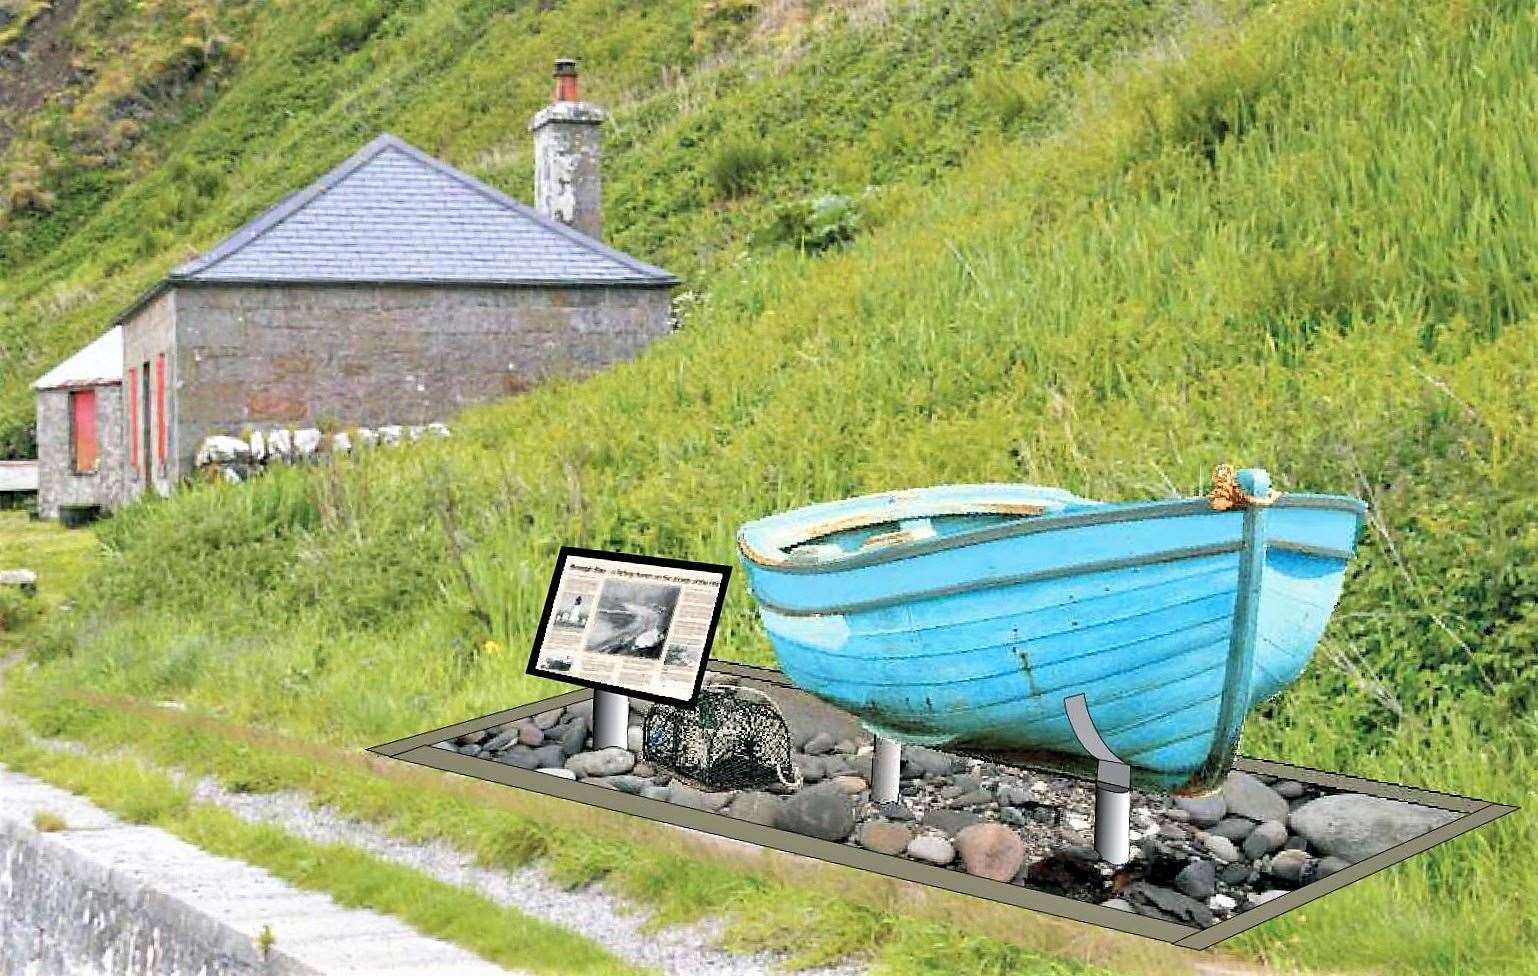 An artist's impression of what the new heritage display will look like at Brough harbour with the Sea Mew as the main feature.